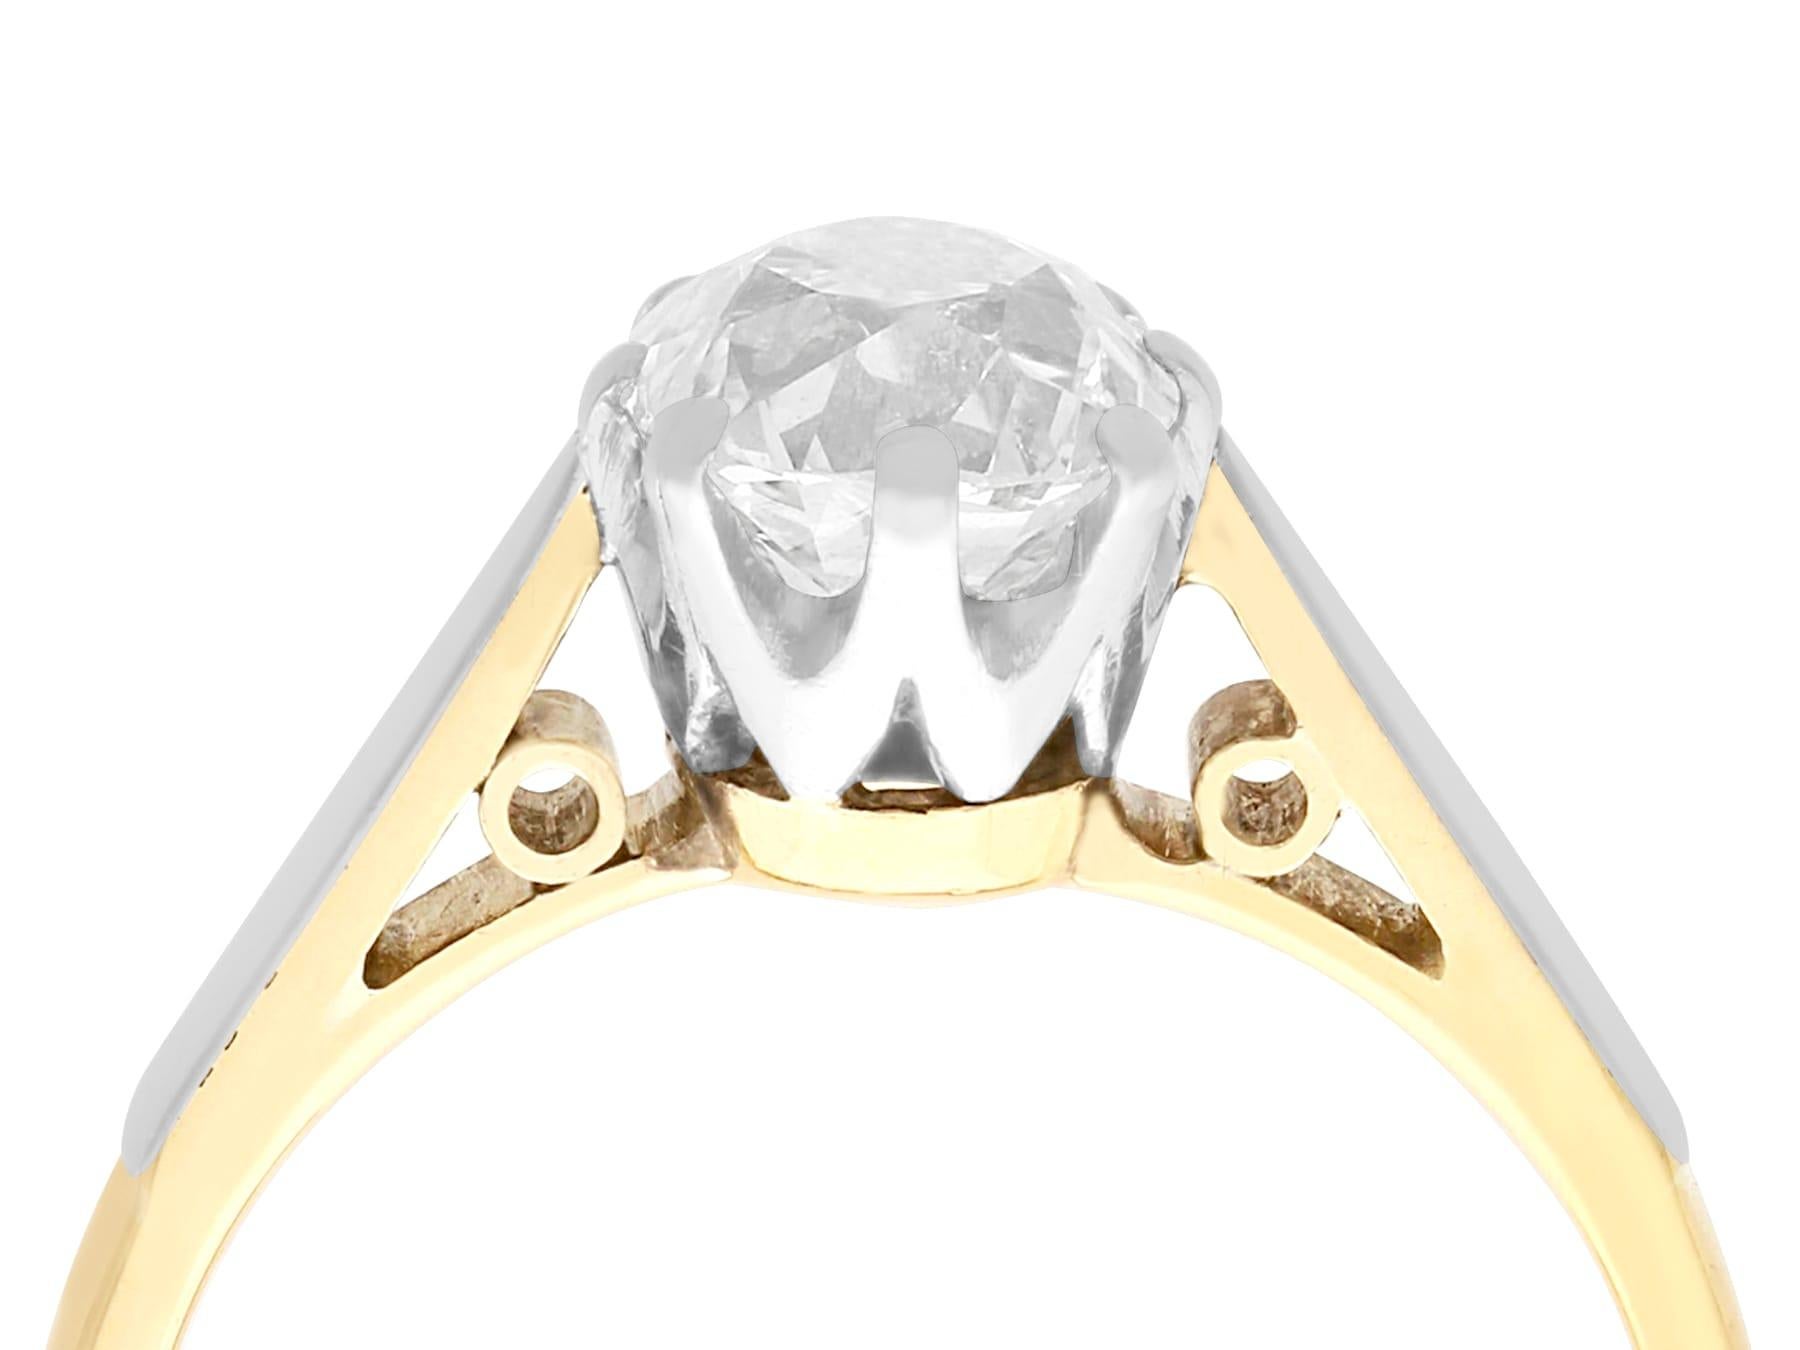 A stunning, fine and impressive 1.23 carat diamond, 18 karat yellow gold and platinum set solitaire ring; part of our diamond jewelry and estate jewelry collections.

This impressive antique Edwardian solitaire ring has been crafted in 18k yellow